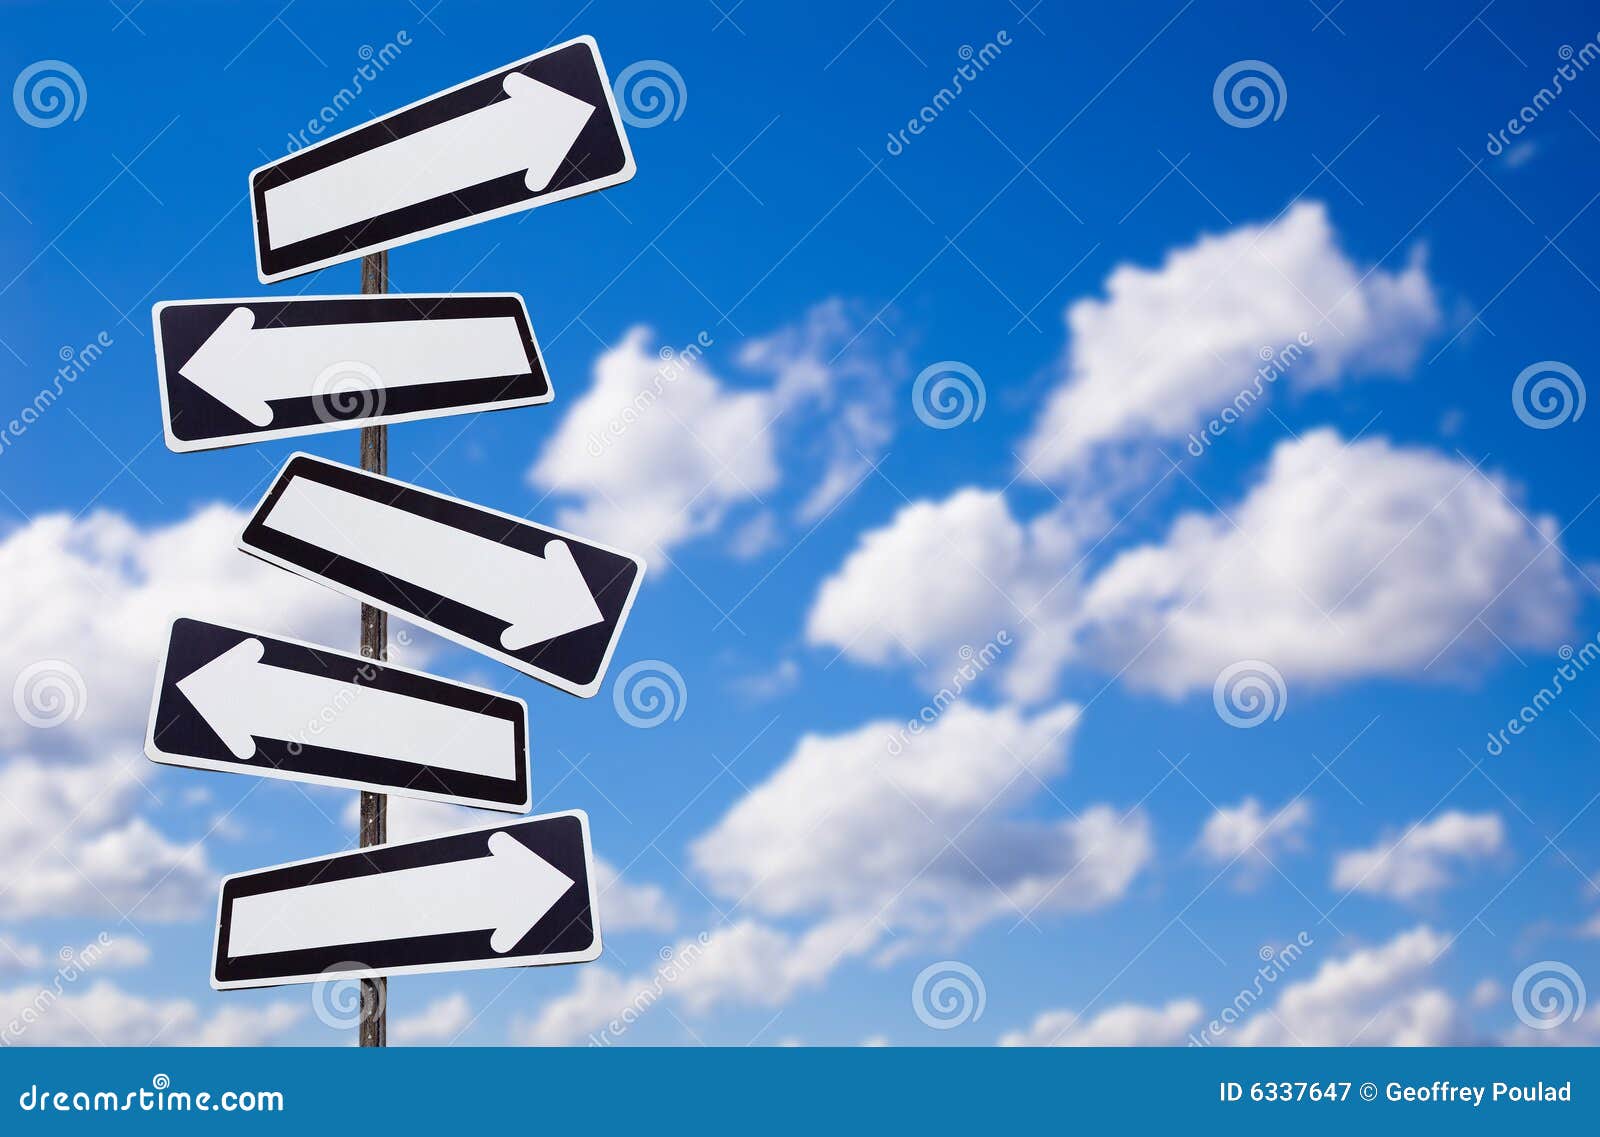 multiple directions signs on blue sky